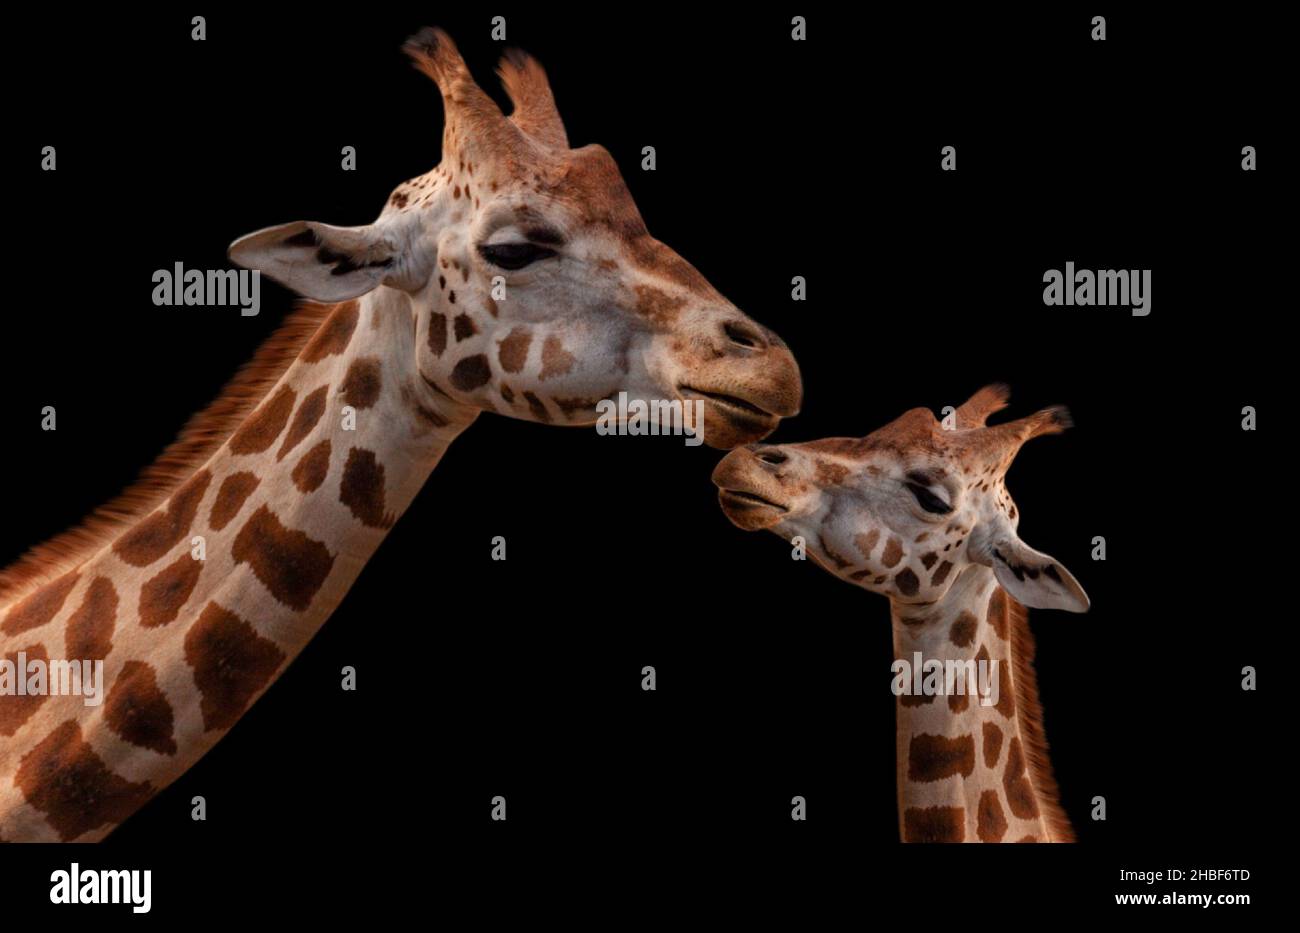 Mother And Baby Giraffe Beautiful Relationship On The Black Background Stock Photo